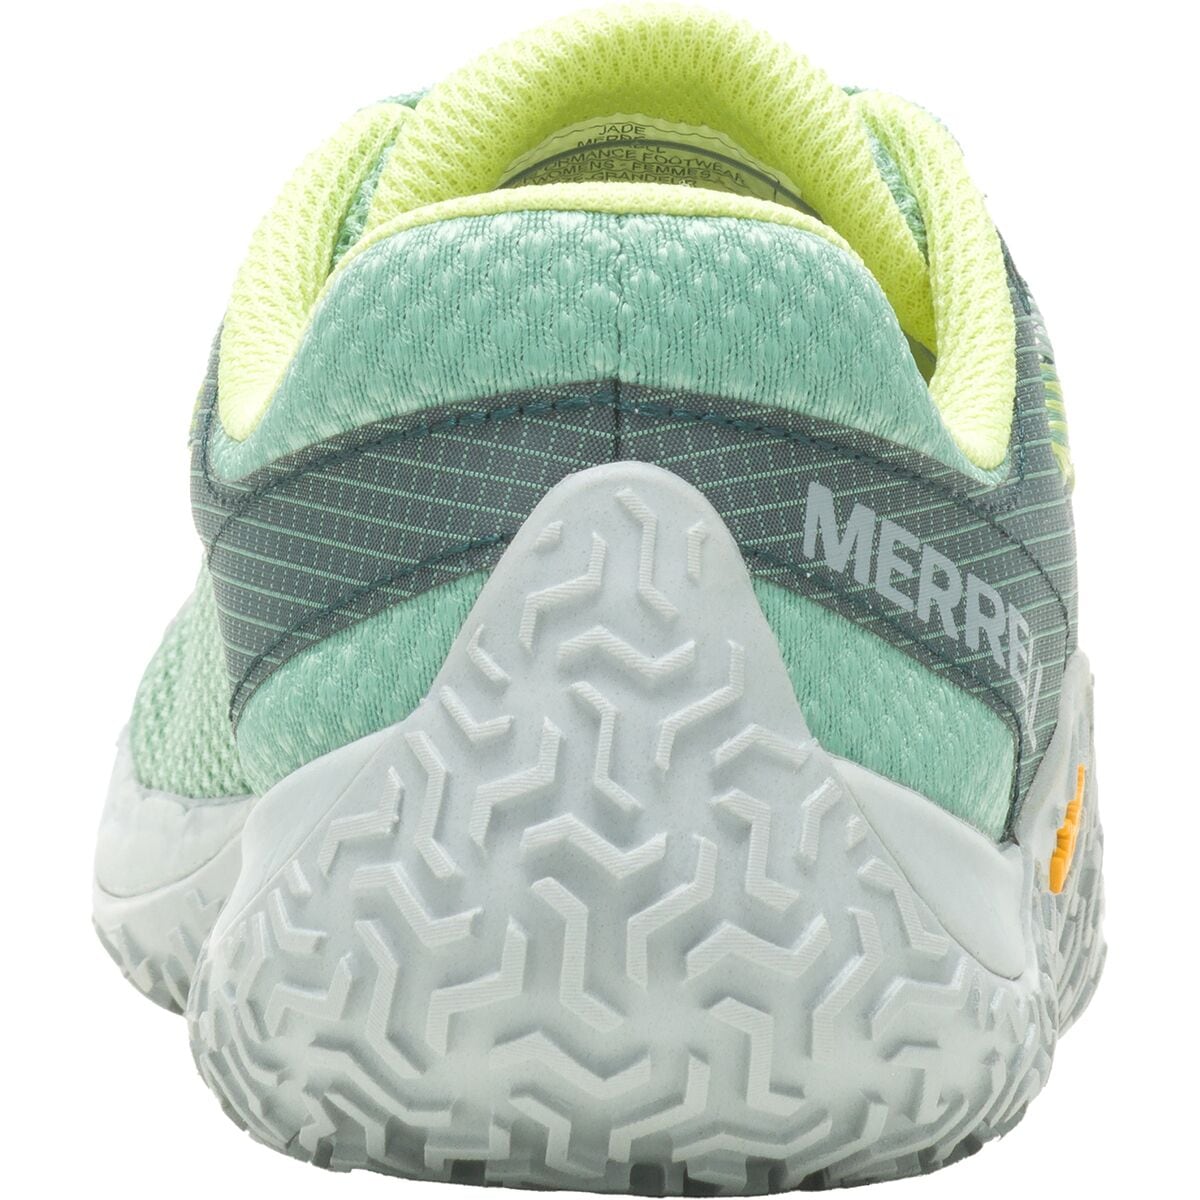 Merrell Trail Glove 7 M special offer